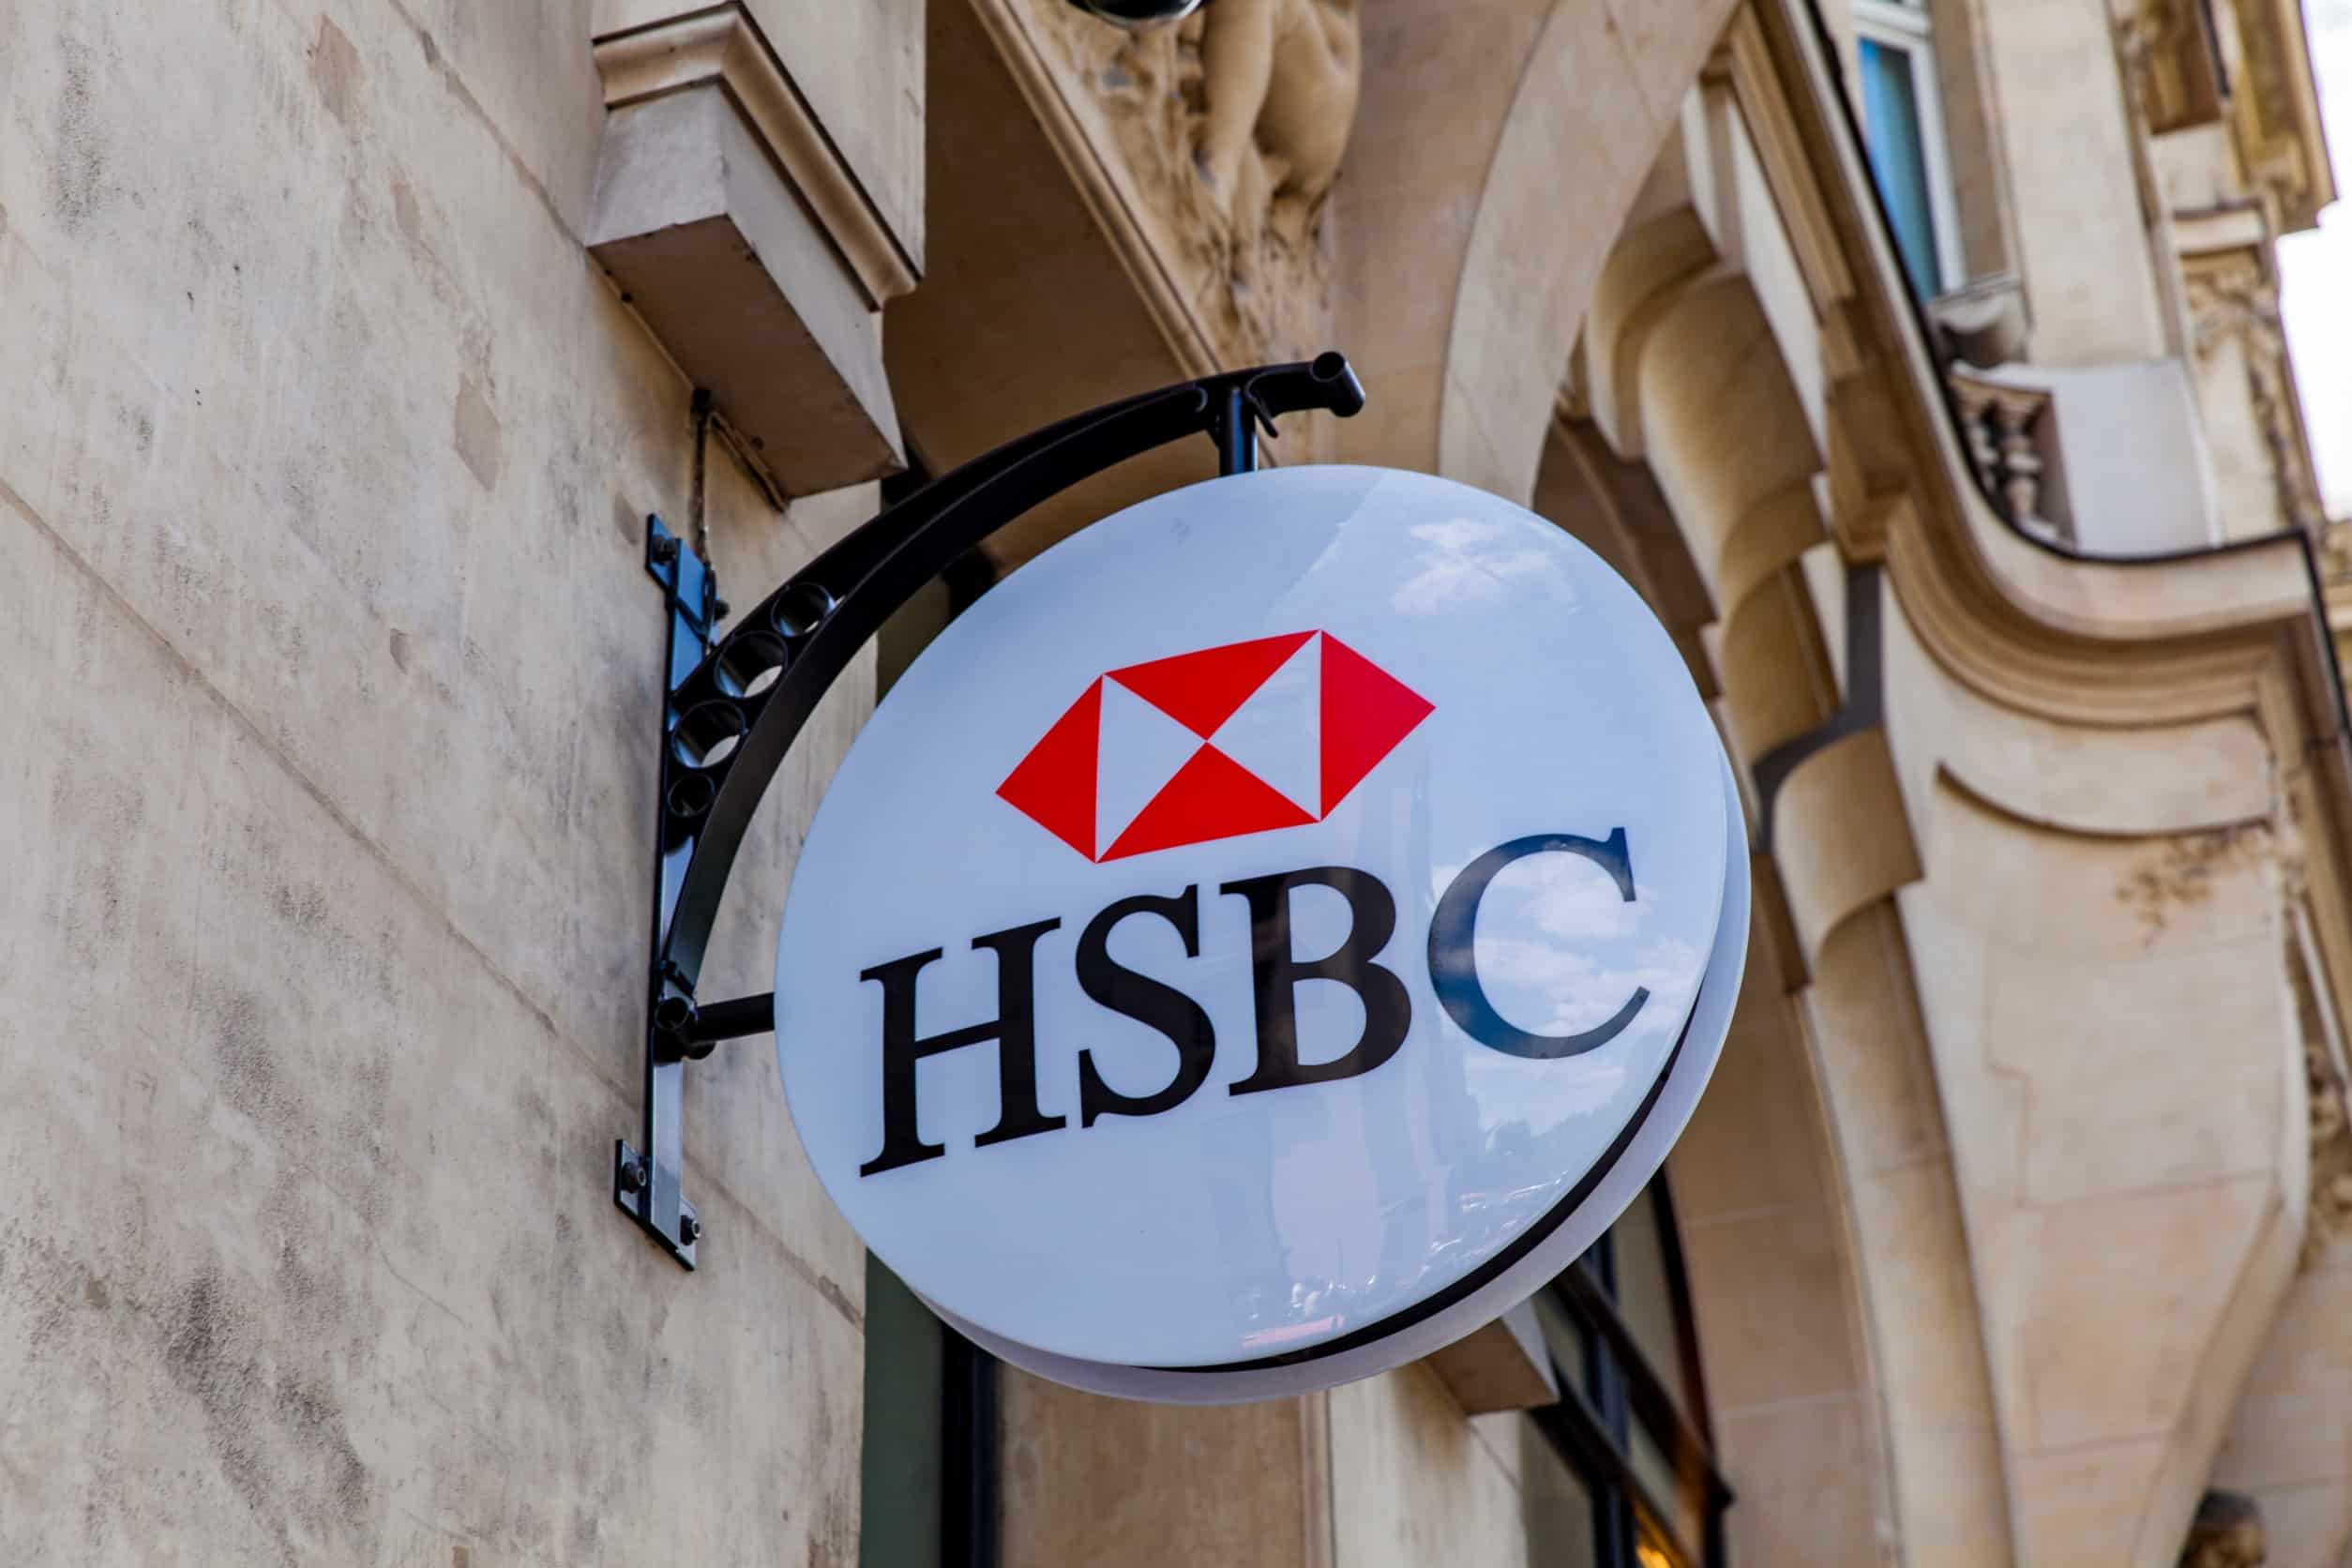 HSBC Share Price Forecast: HSBC Sells Canadian Business to RBC For $10 Billion